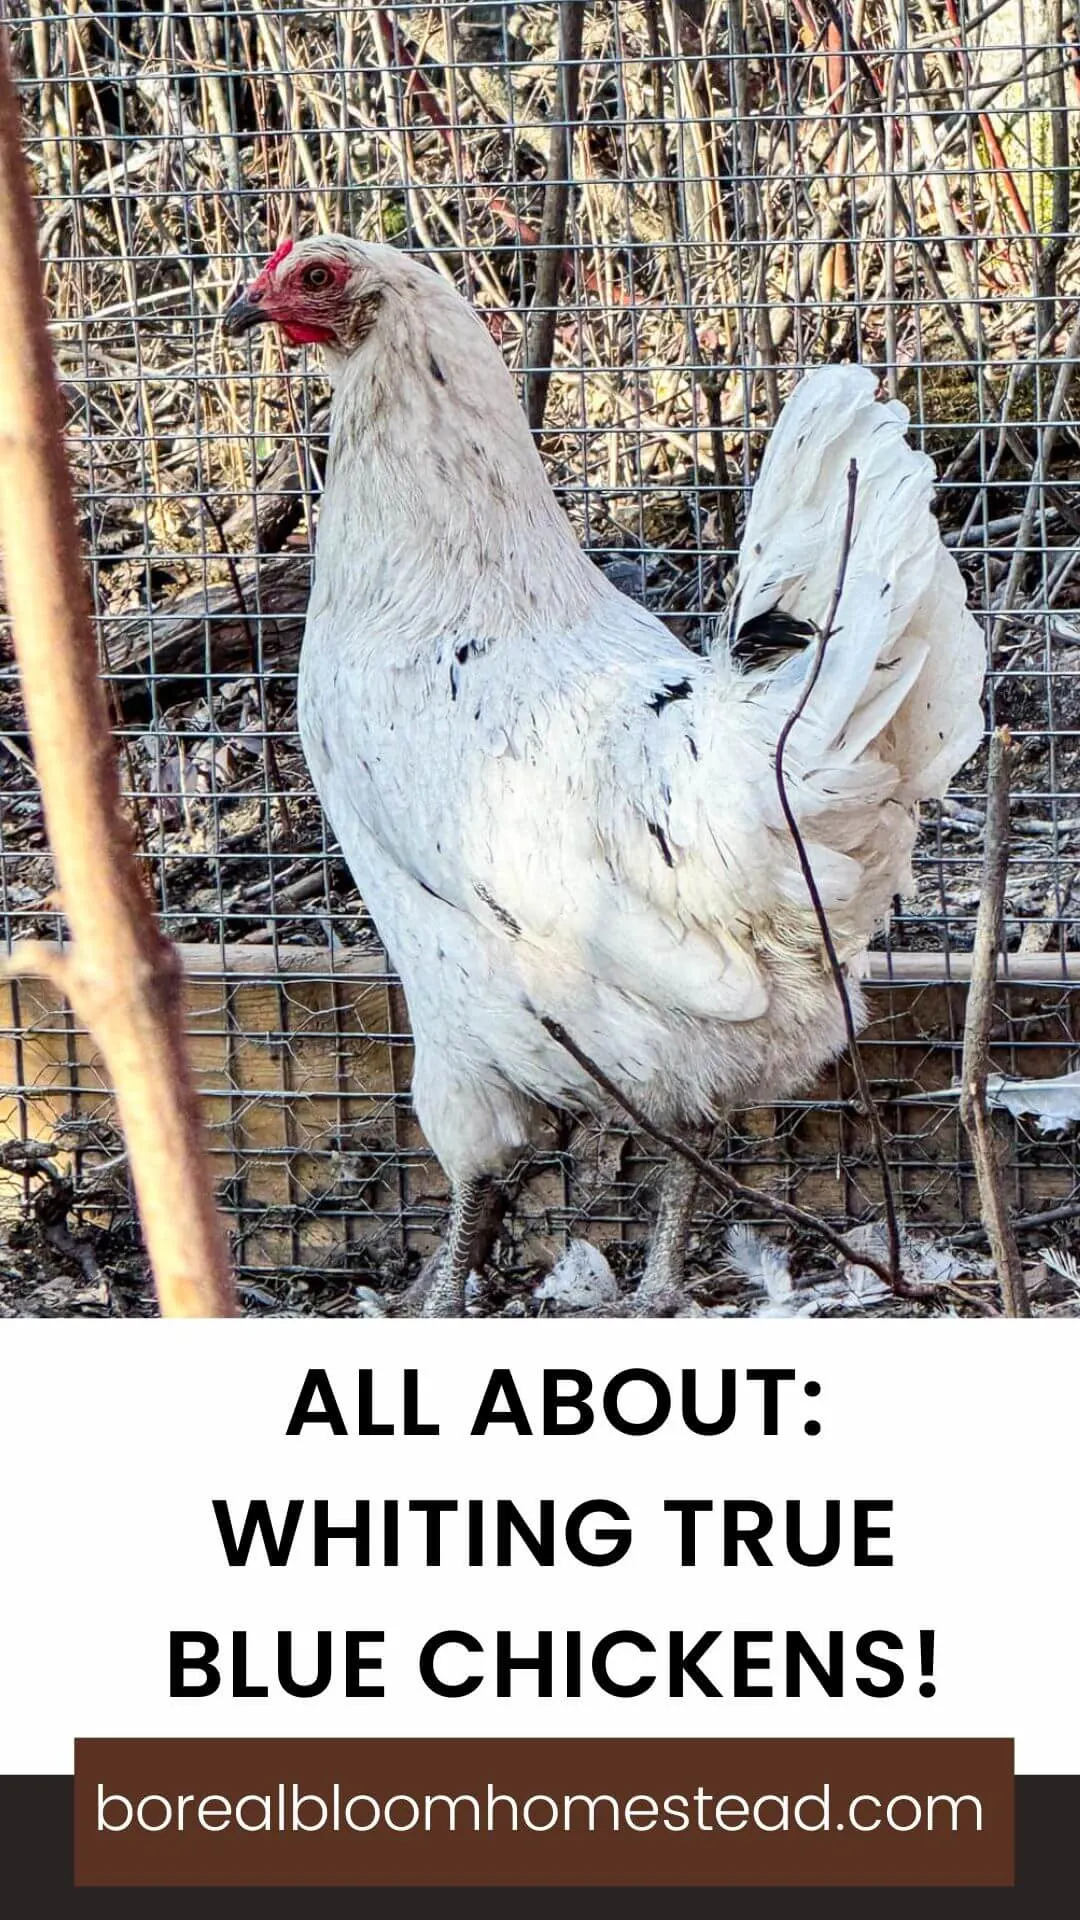 Chicken wiht text overlay : all about whiting true blue chickens. 